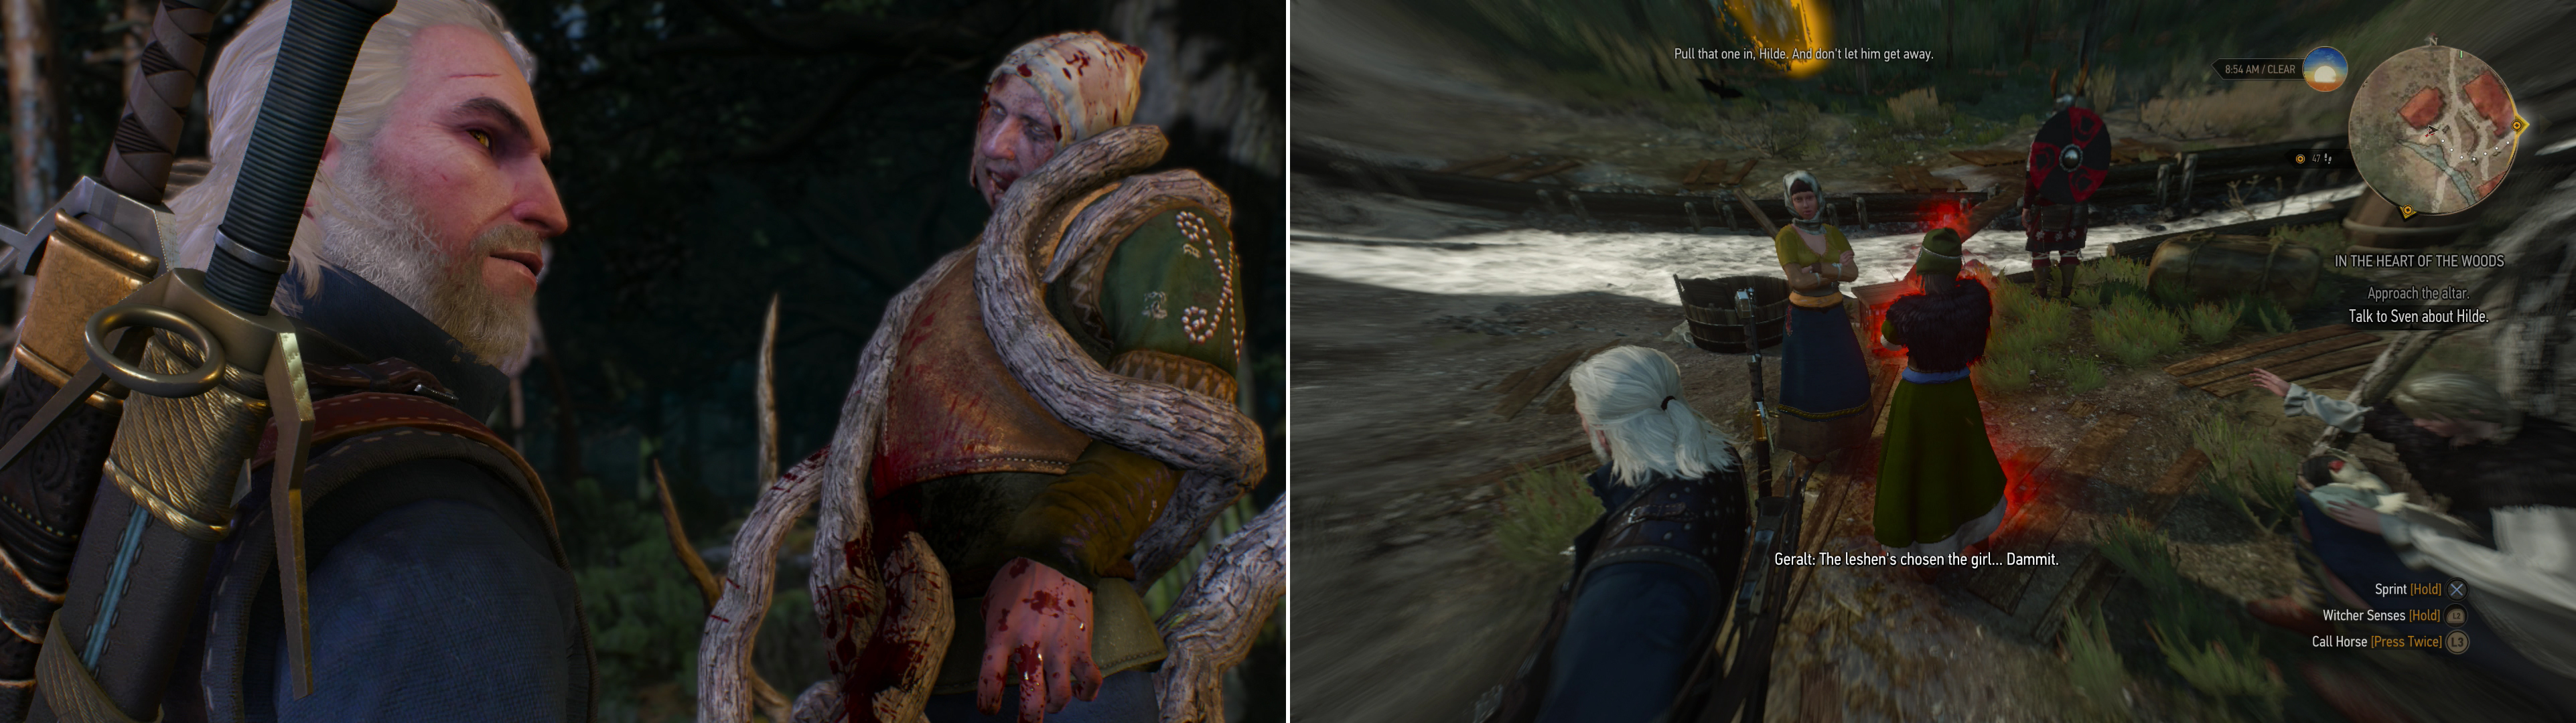 Looks like Witcher's Work (left). Track down the villager marked by the monster (right).